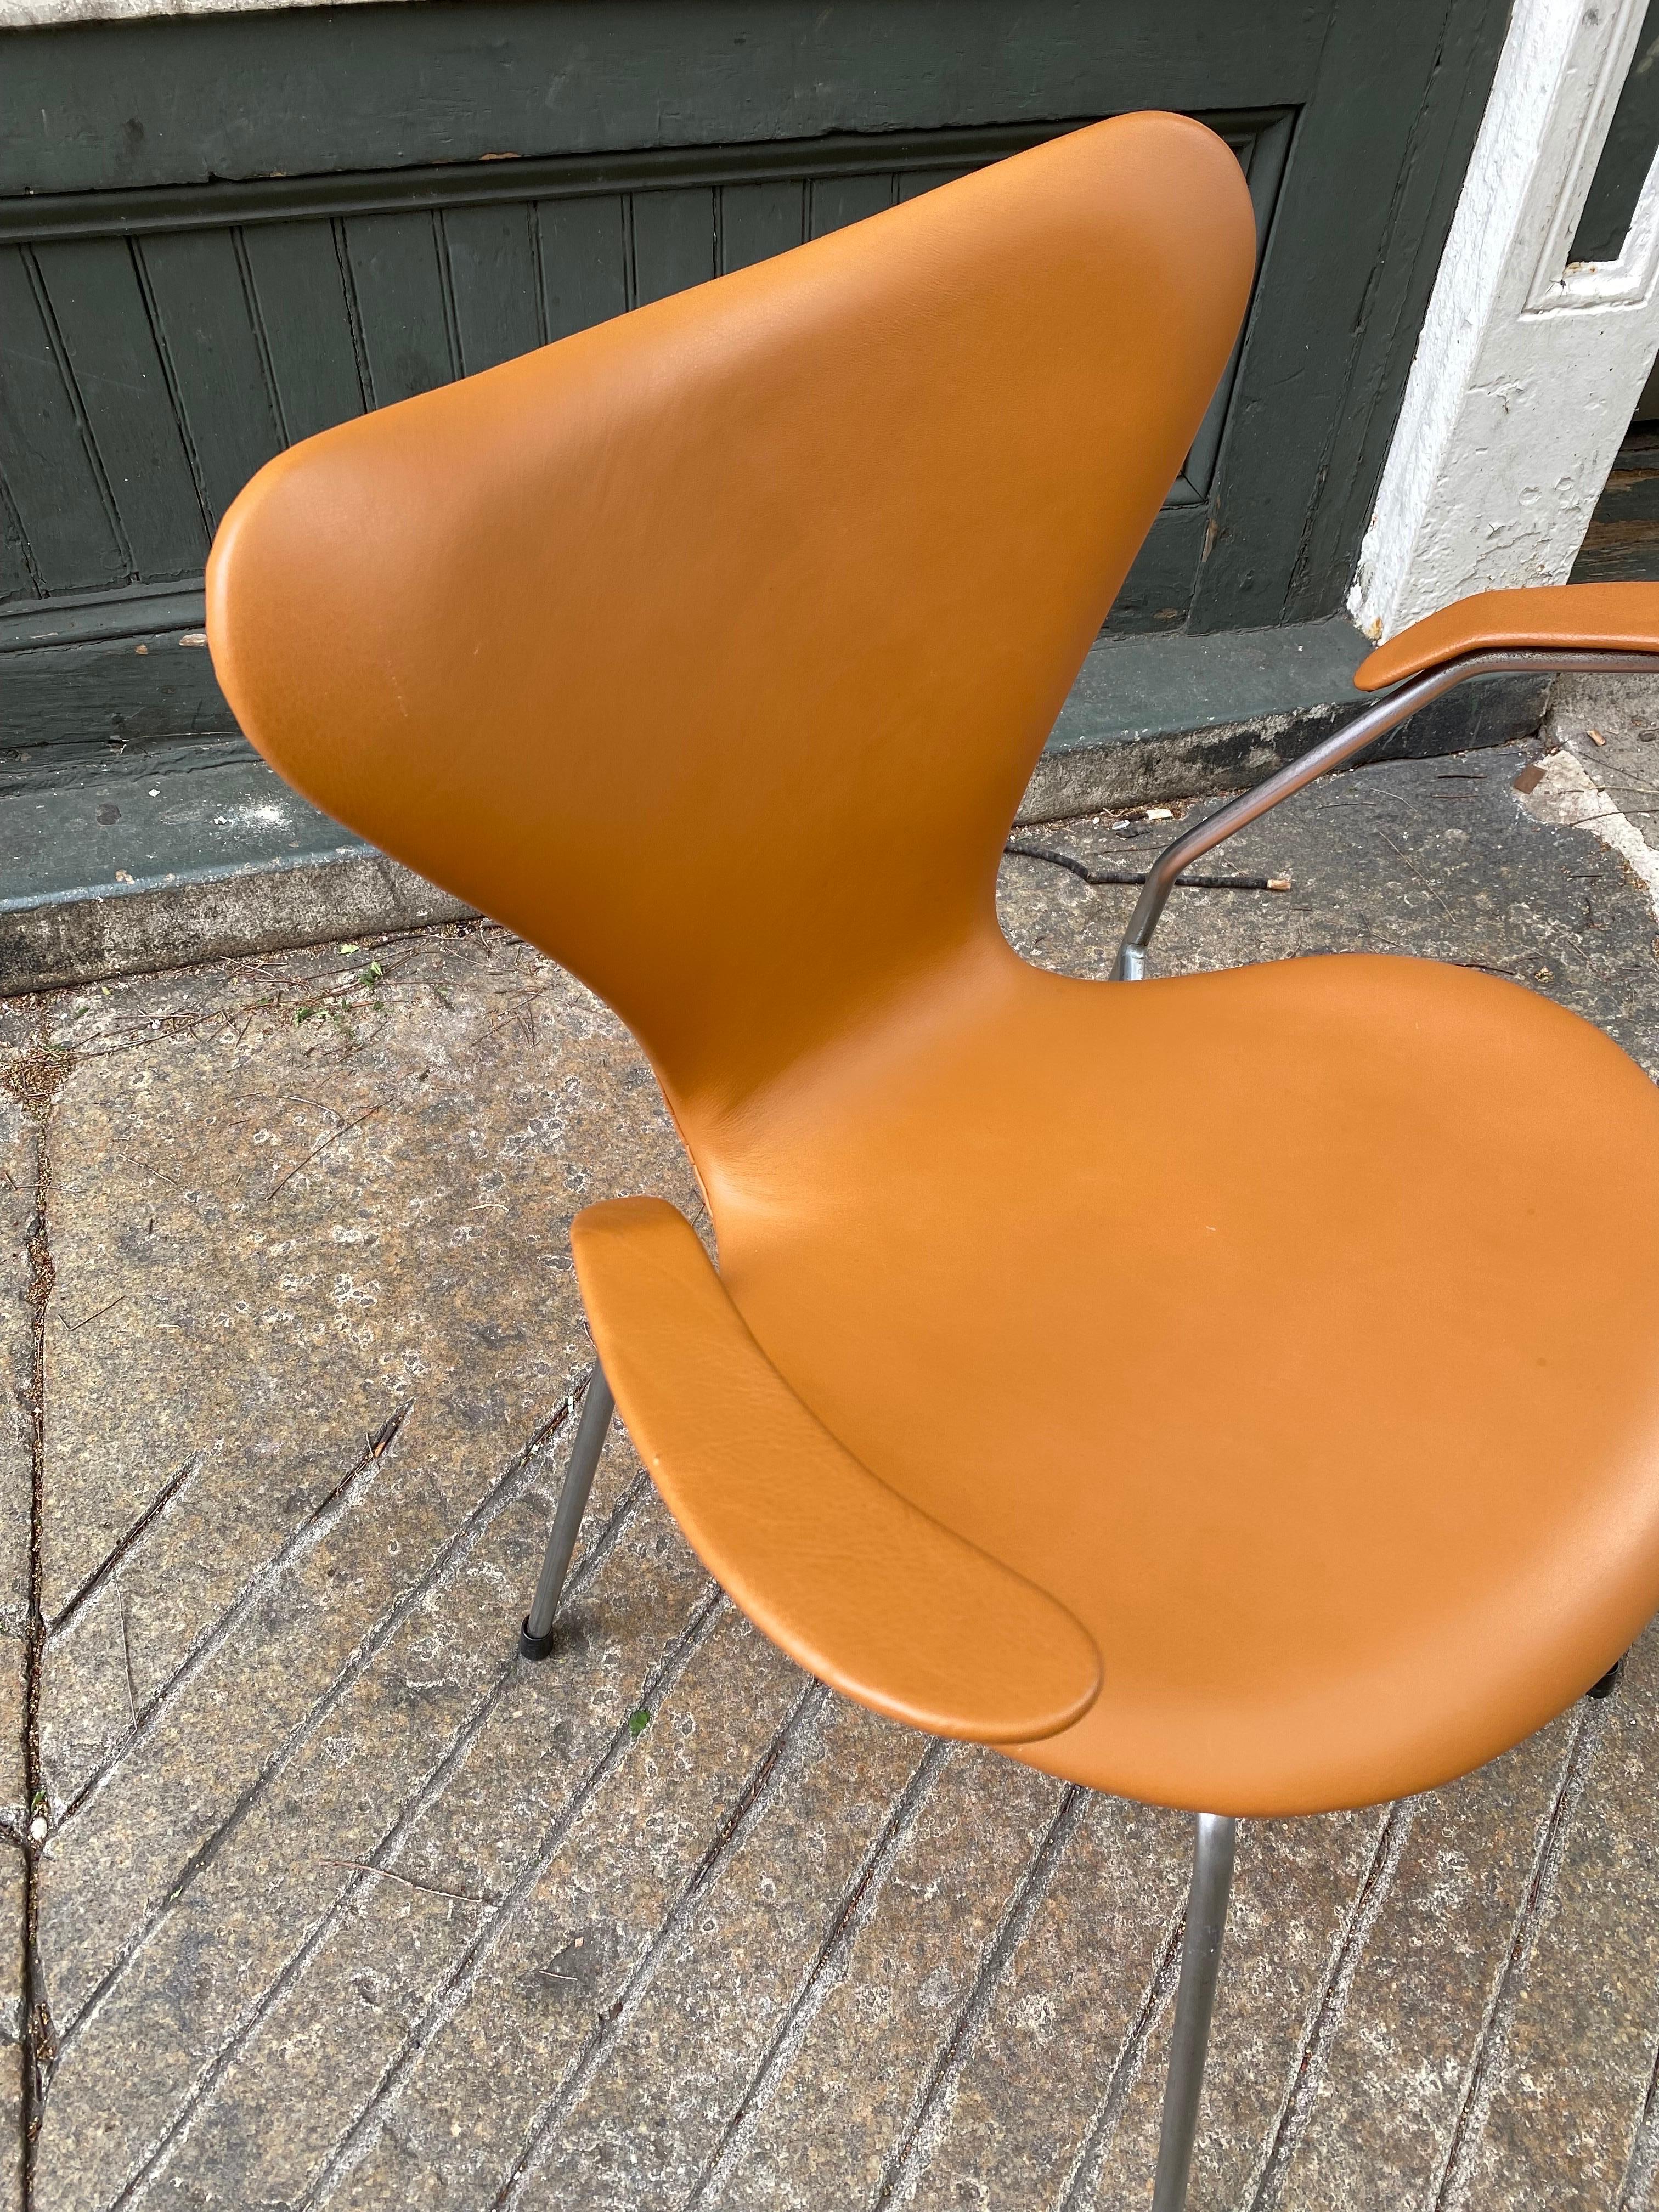 Arne Jacobsen for Fritz Hansen Series 7 armchair Model 3207 newly reupholstered in a brown leather. Beautiful condition and ready to go! Original Label reattached.